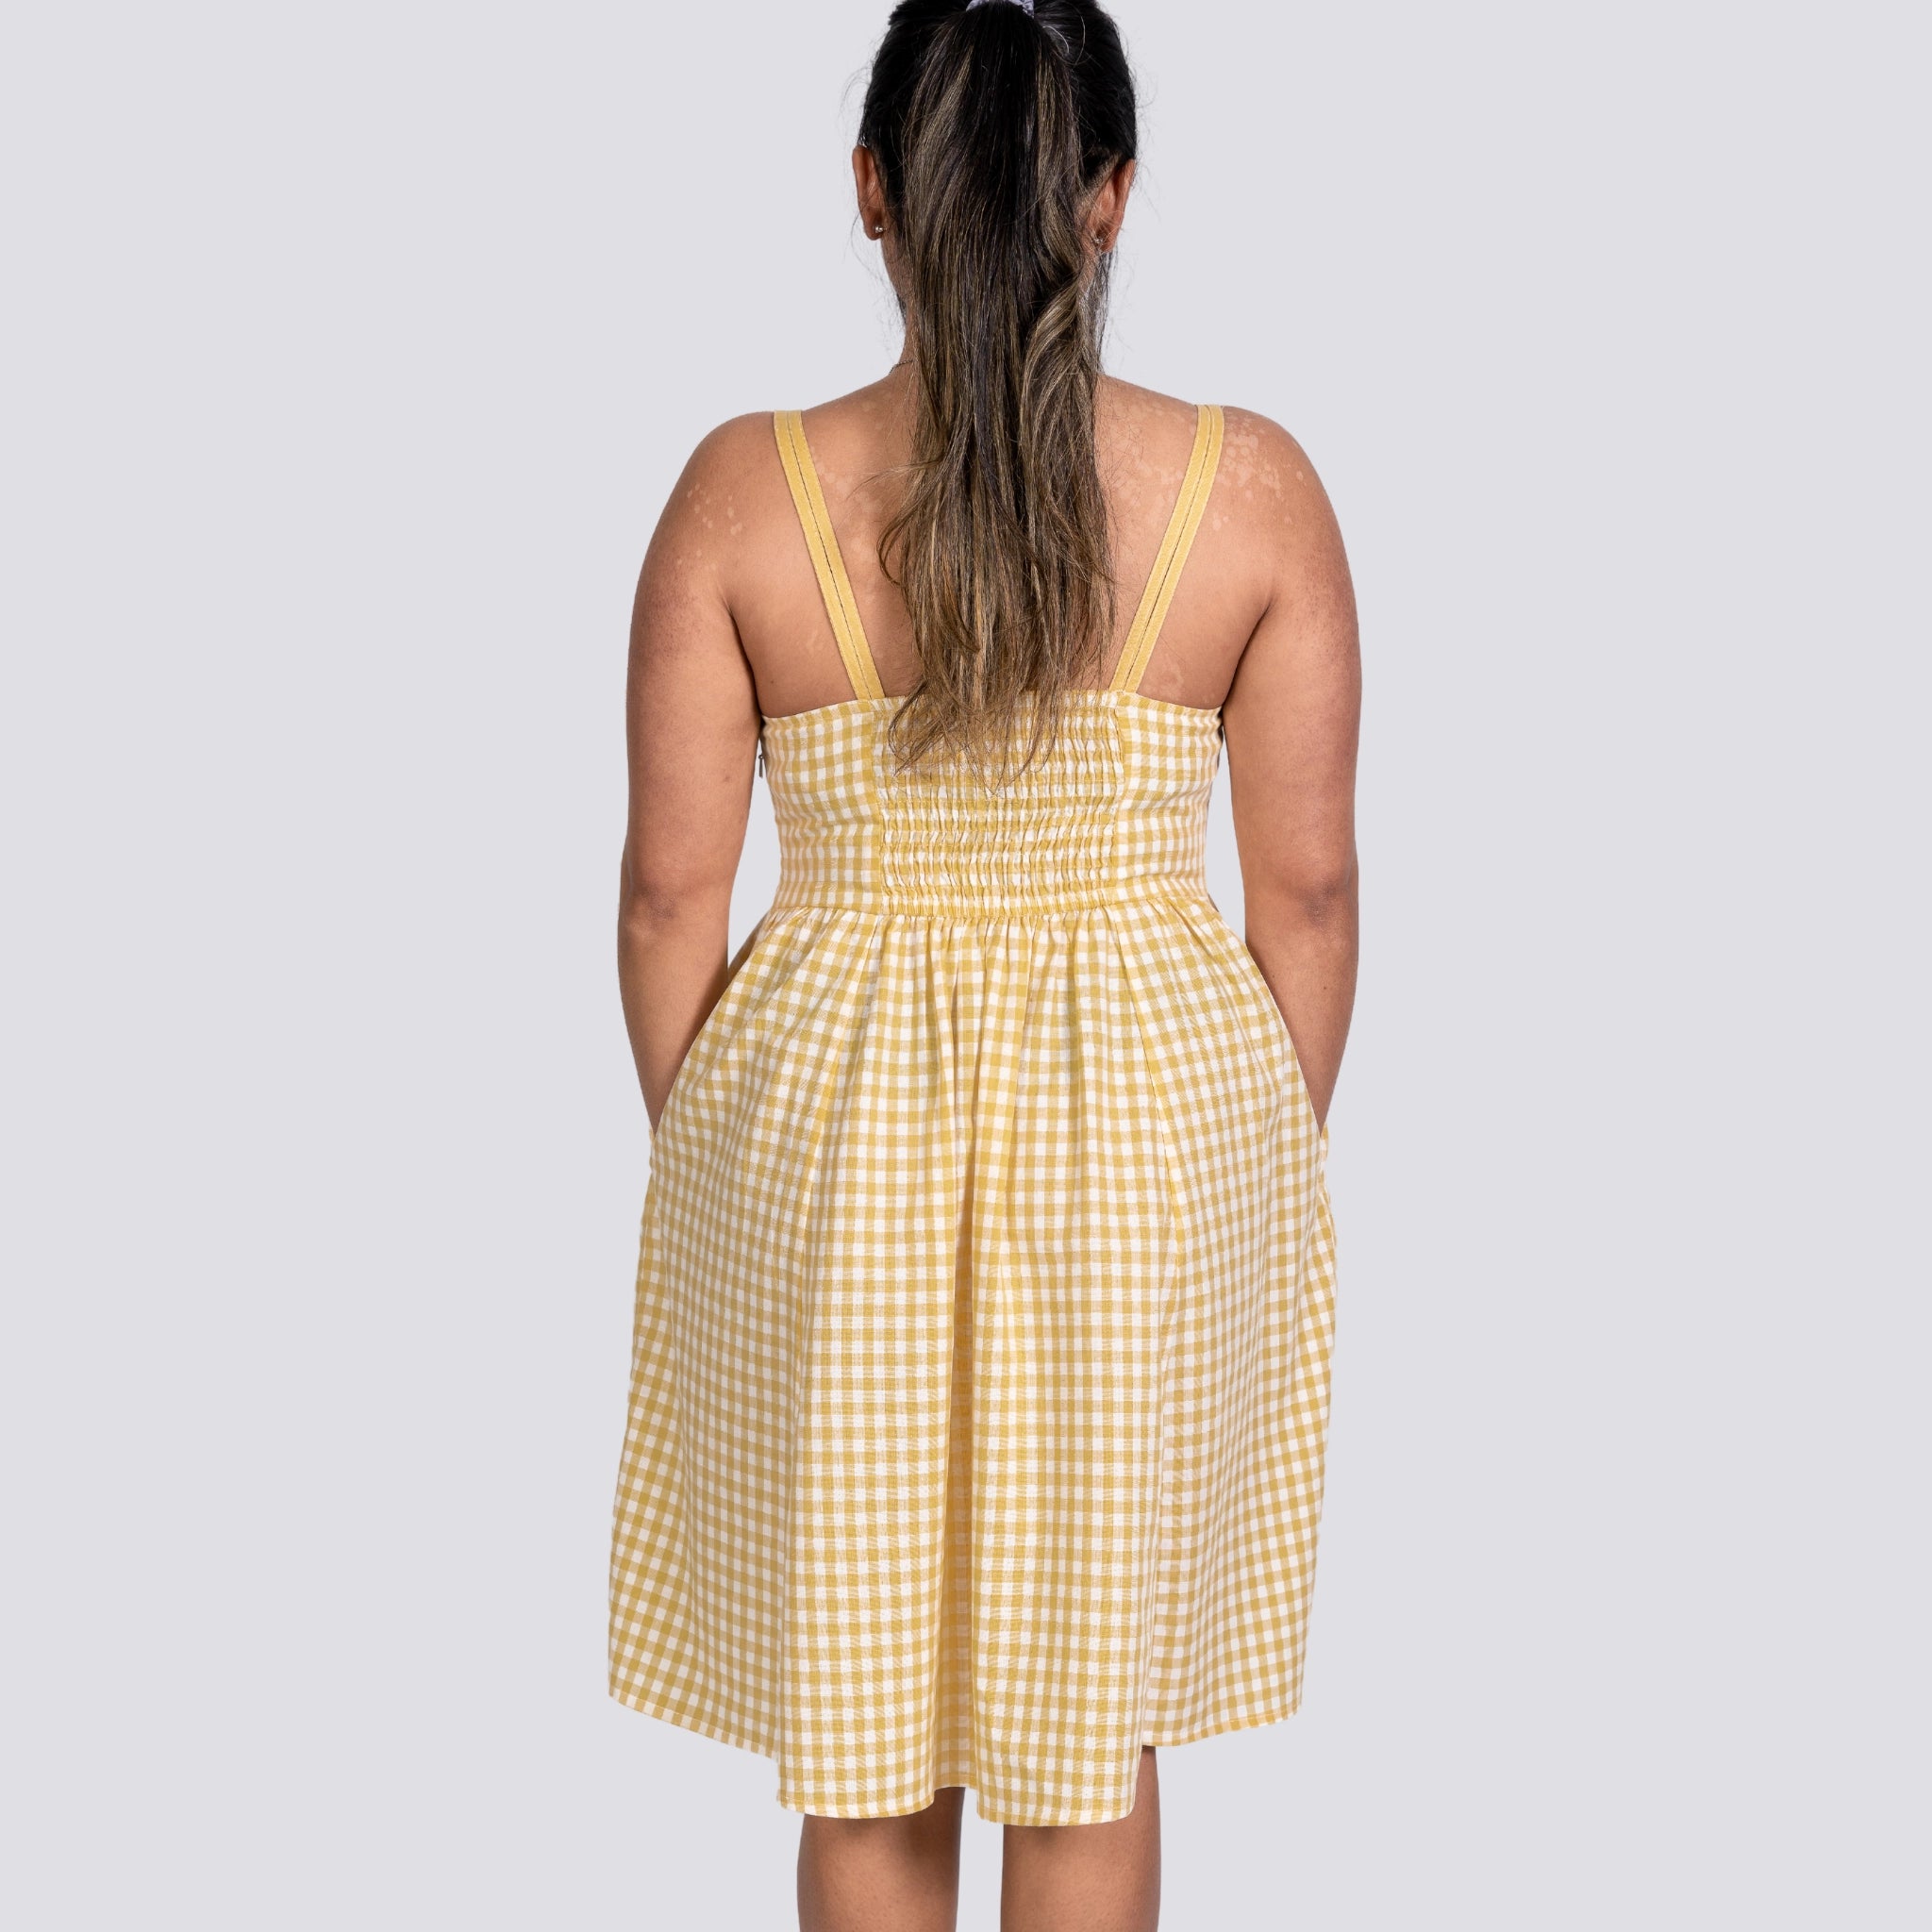 Woman viewed from behind, wearing a Karee Sunshine Chic Yellow Plaid Cotton Mini Dress with thin straps, standing against a gray background.